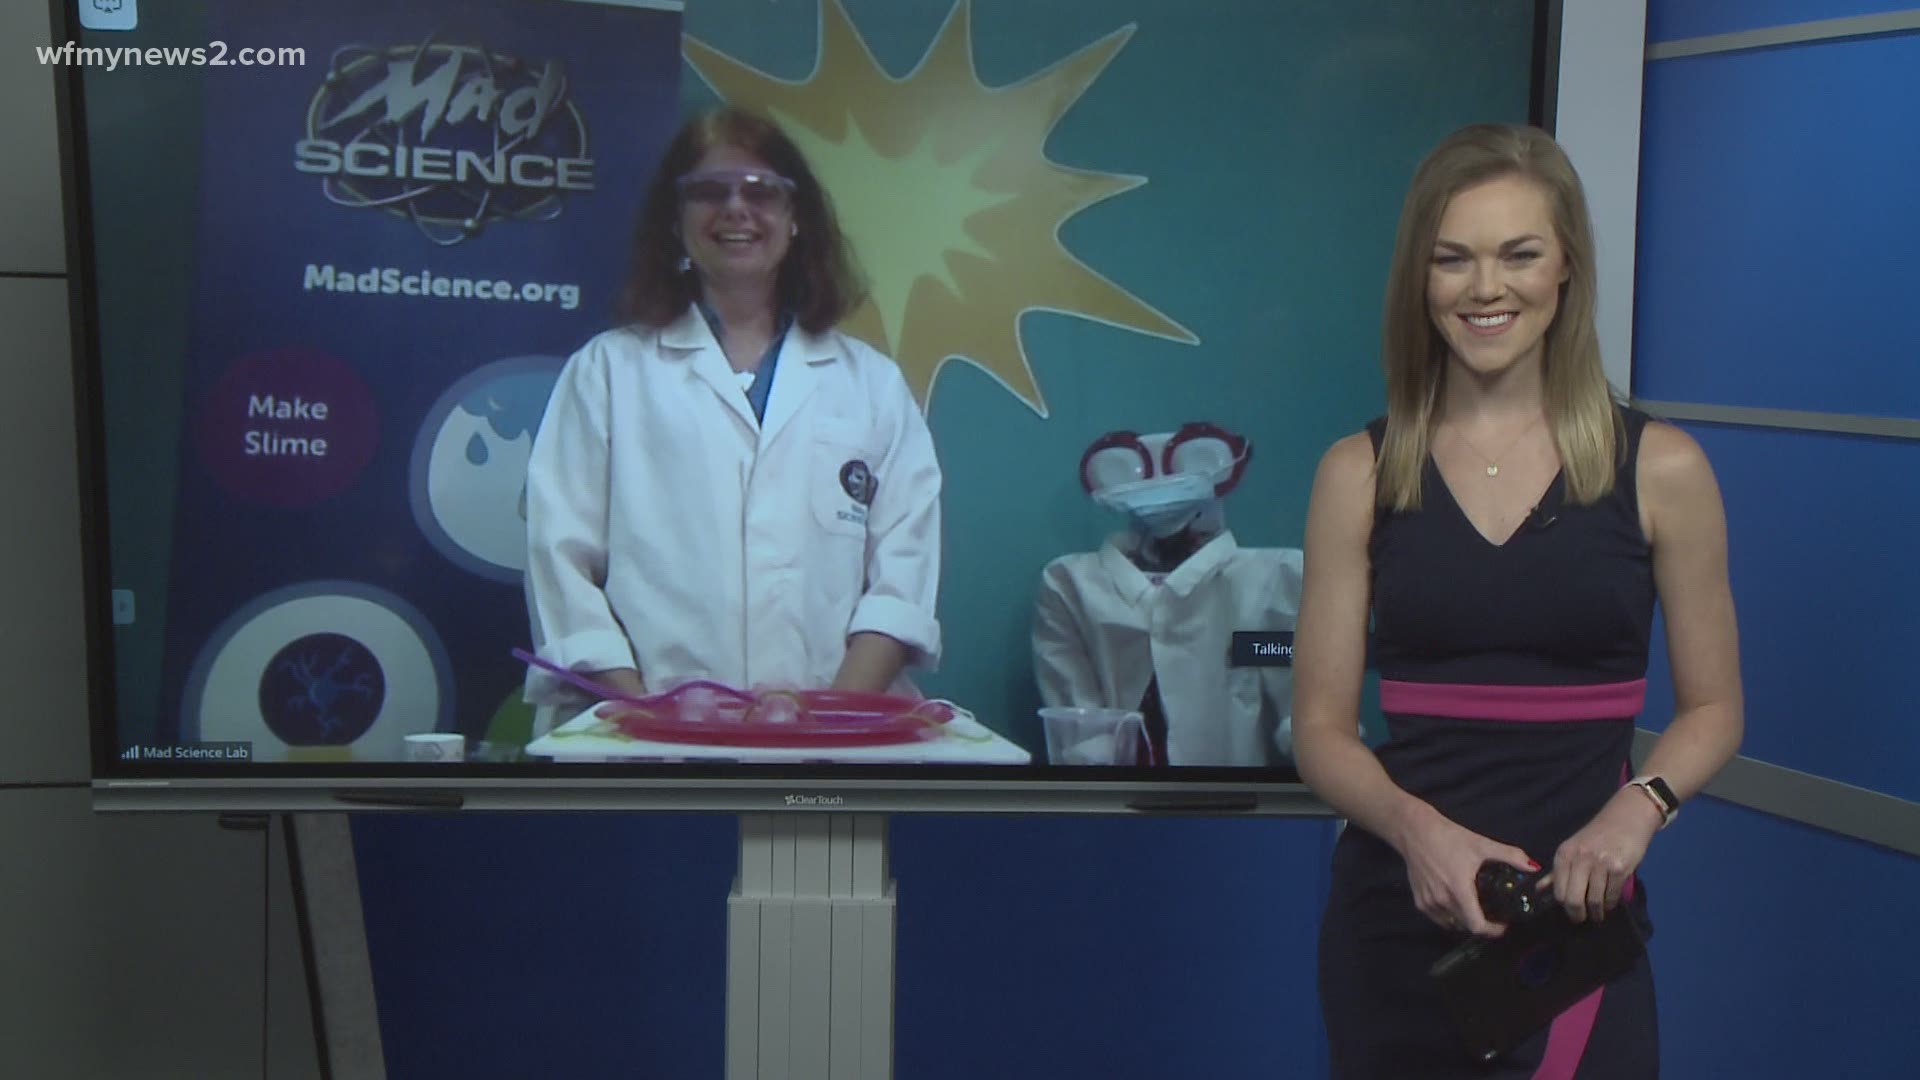 Need a way to keep the kids engaged this Summer? Mad Science in Winston-Salem will keep your little ones smiling, all while learning science!